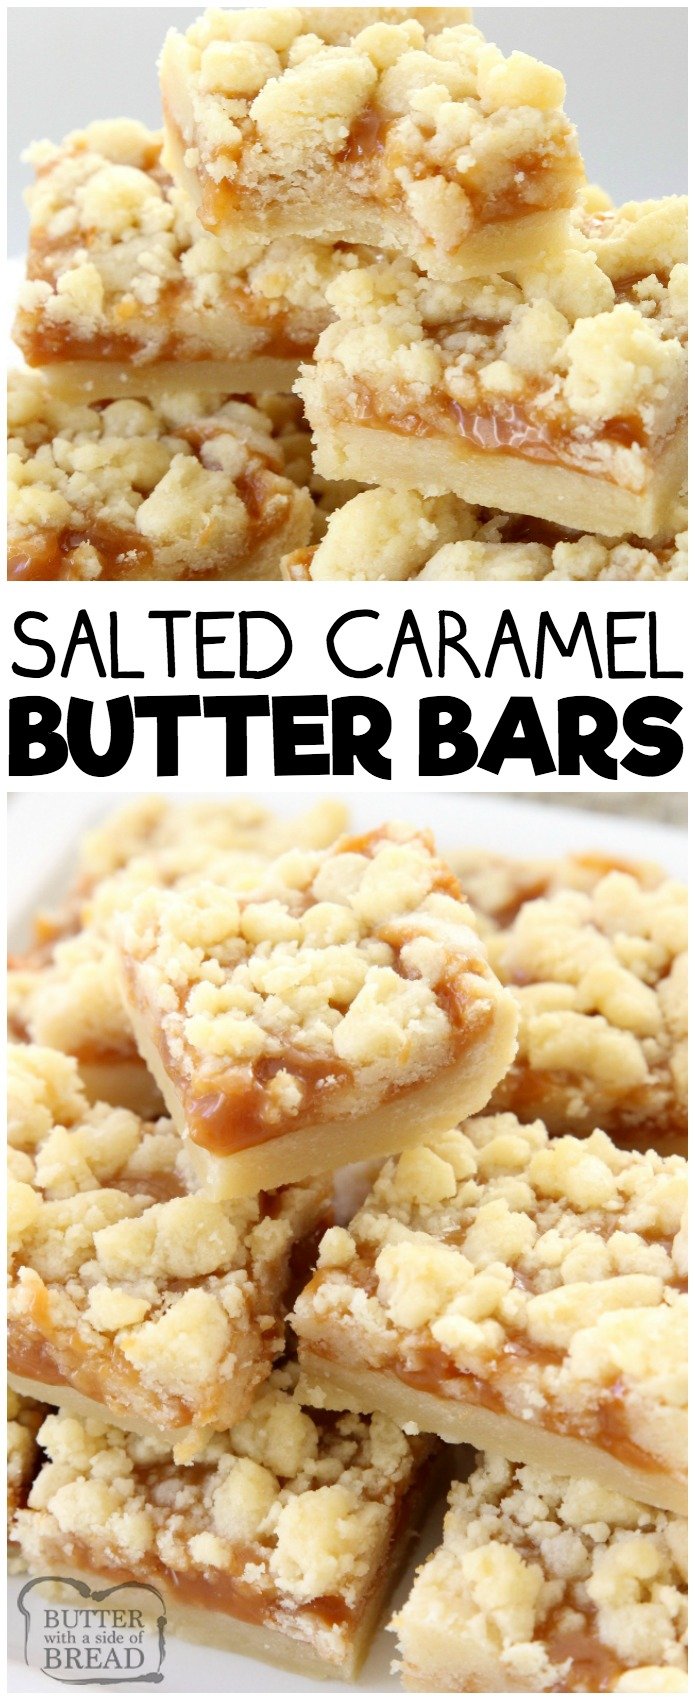 Salted Caramel Bar recipe made with a sweet shortbread crust & topped with smooth caramel and sea salt. Perfectly indulgent caramel butter bar dessert! #caramel #dessert #butter #baking #recipe from BUTTER WITH A SIDE OF BREAD